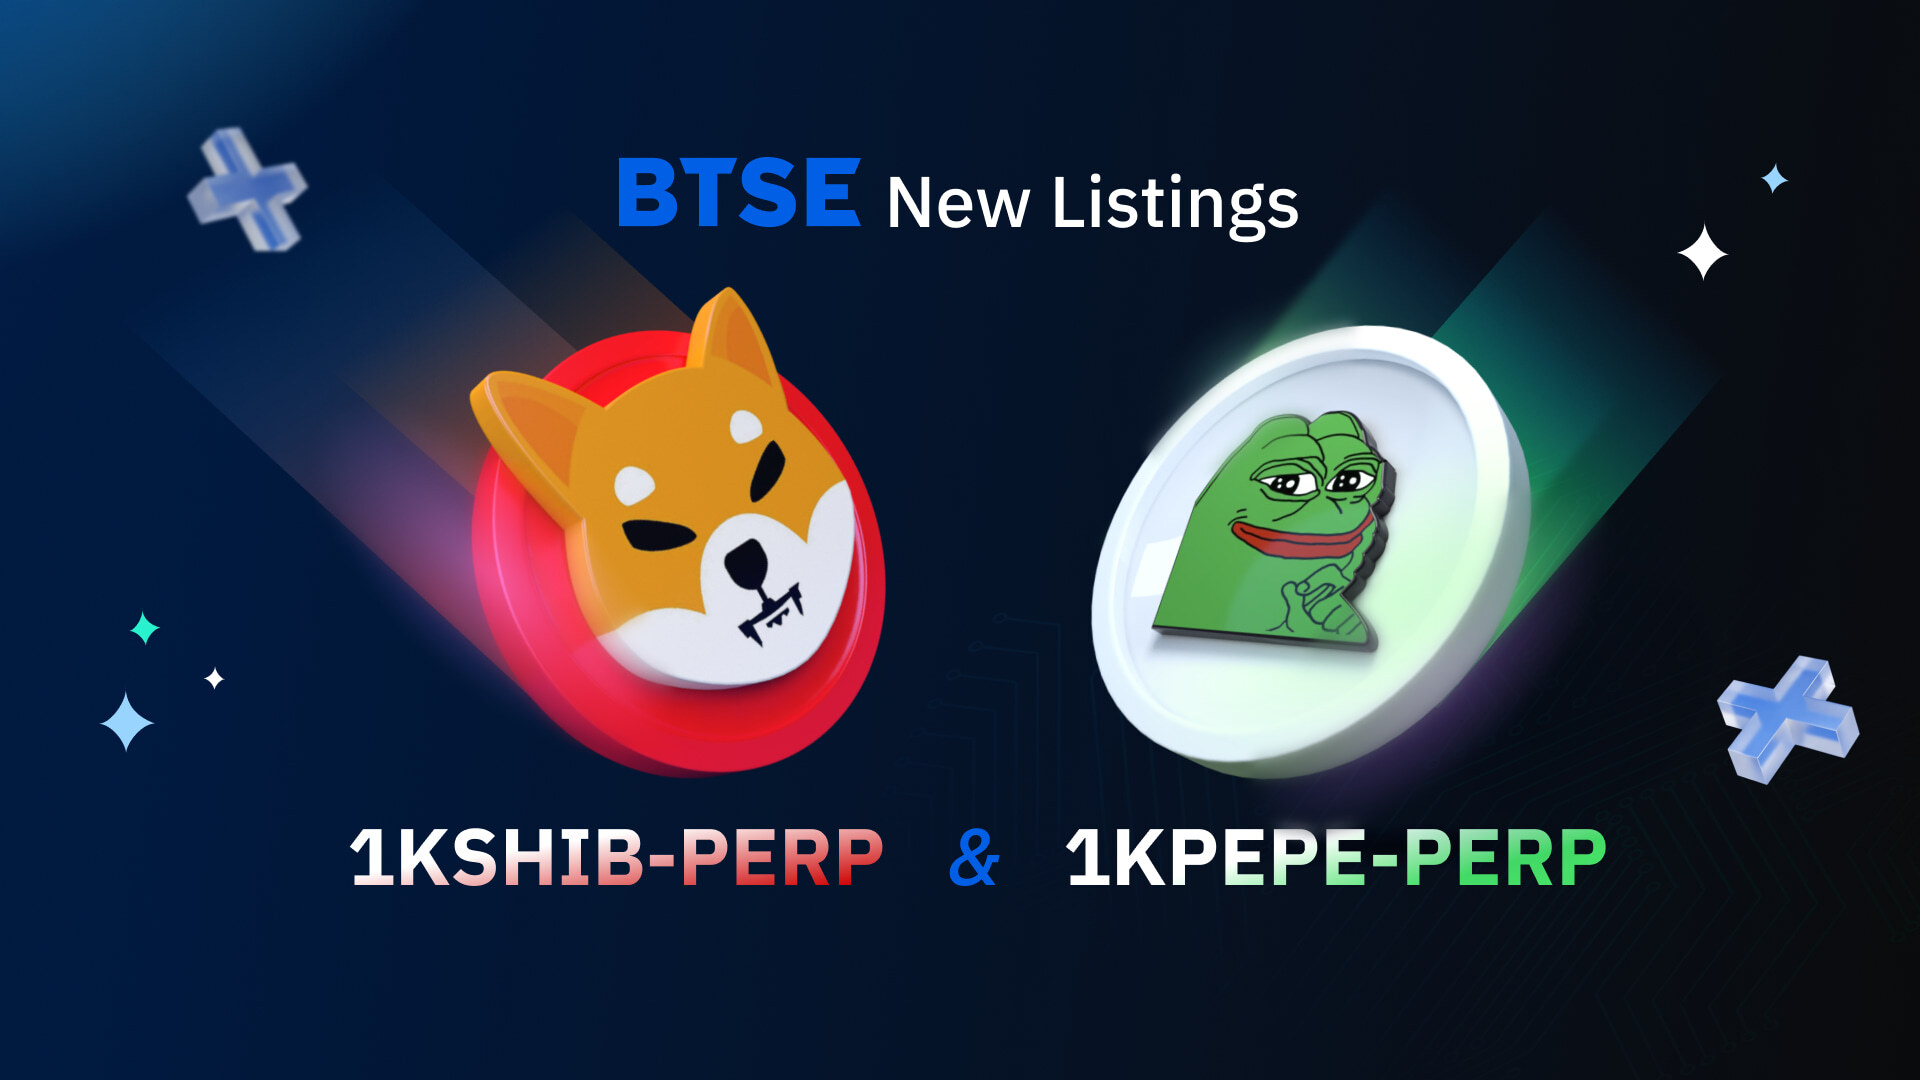 BTSE Lists 1KSHIB-PERP and 1KPEPE-PERP